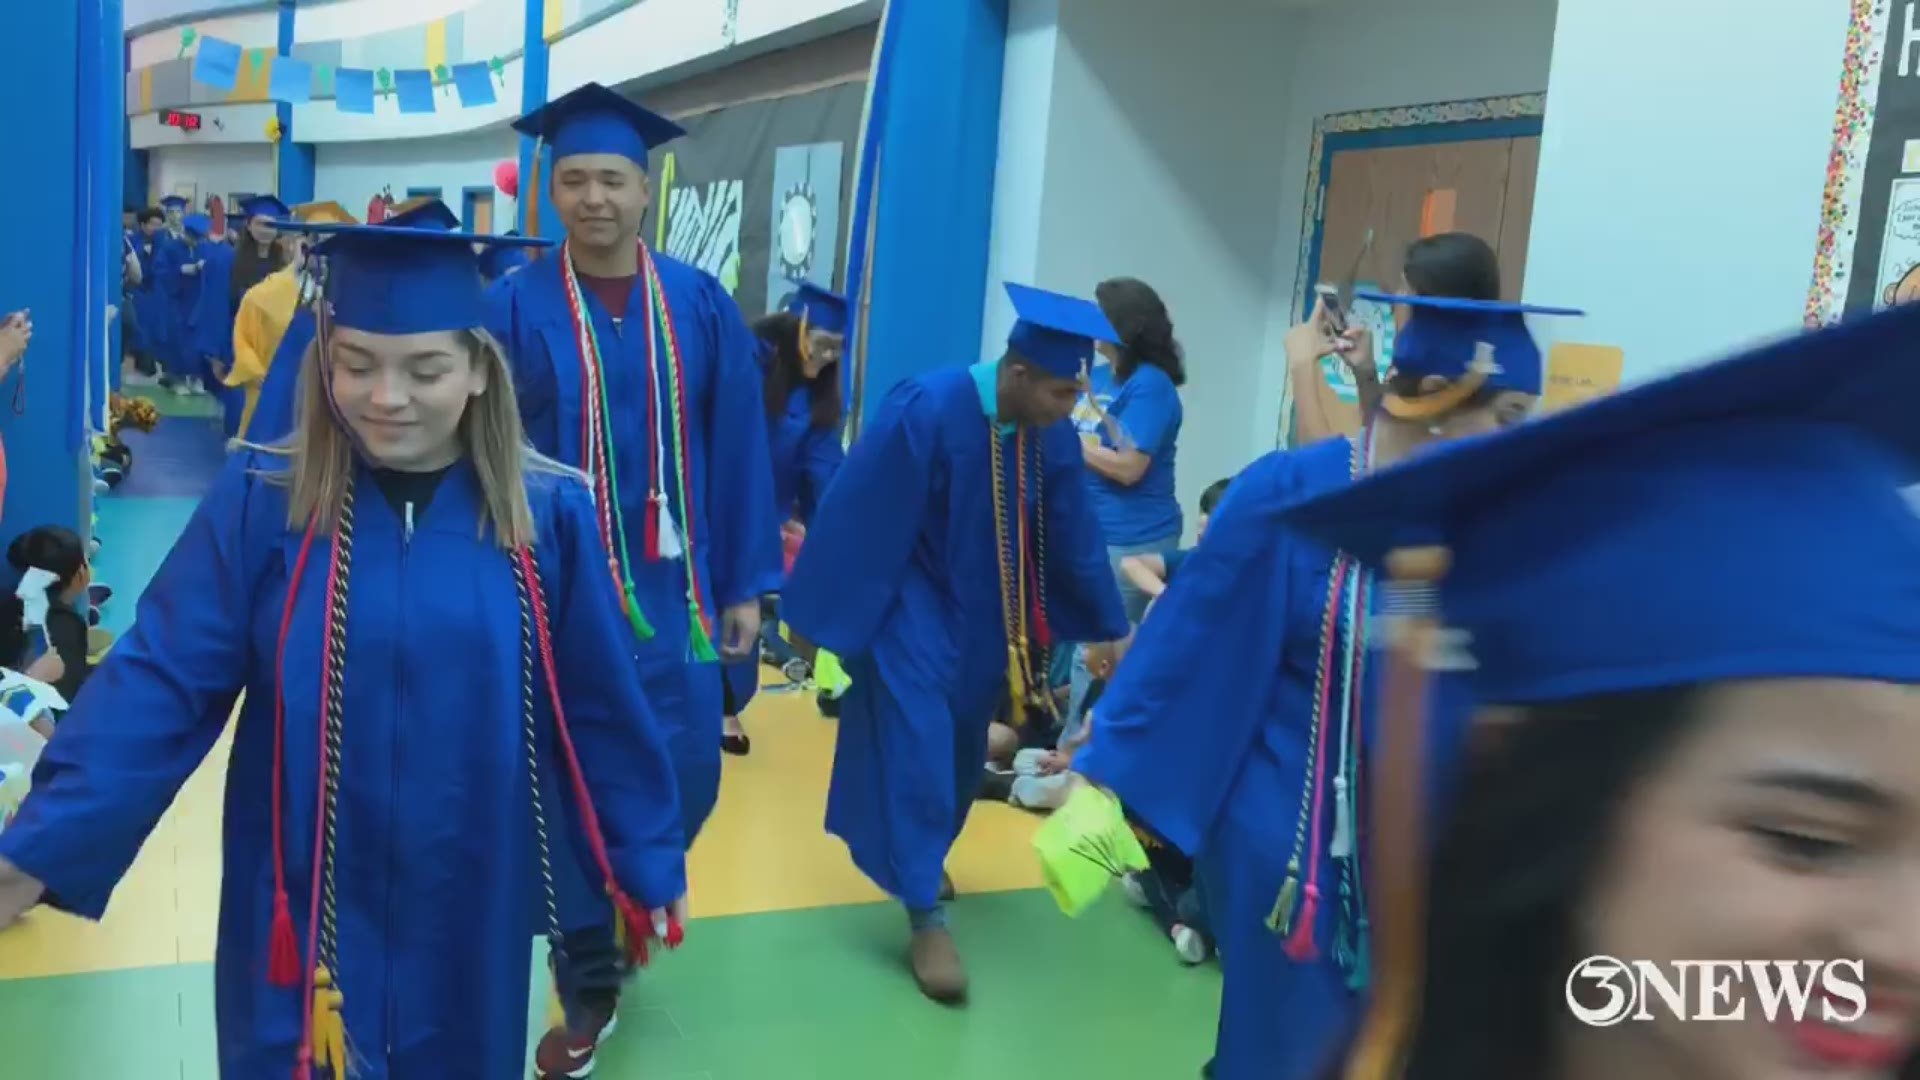 The Moody High School graduating class of 2019 paid a visit to students at Los Encinos Elementary School before walking across the big stage. Their visit was aimed at encouraging young students to finish school.